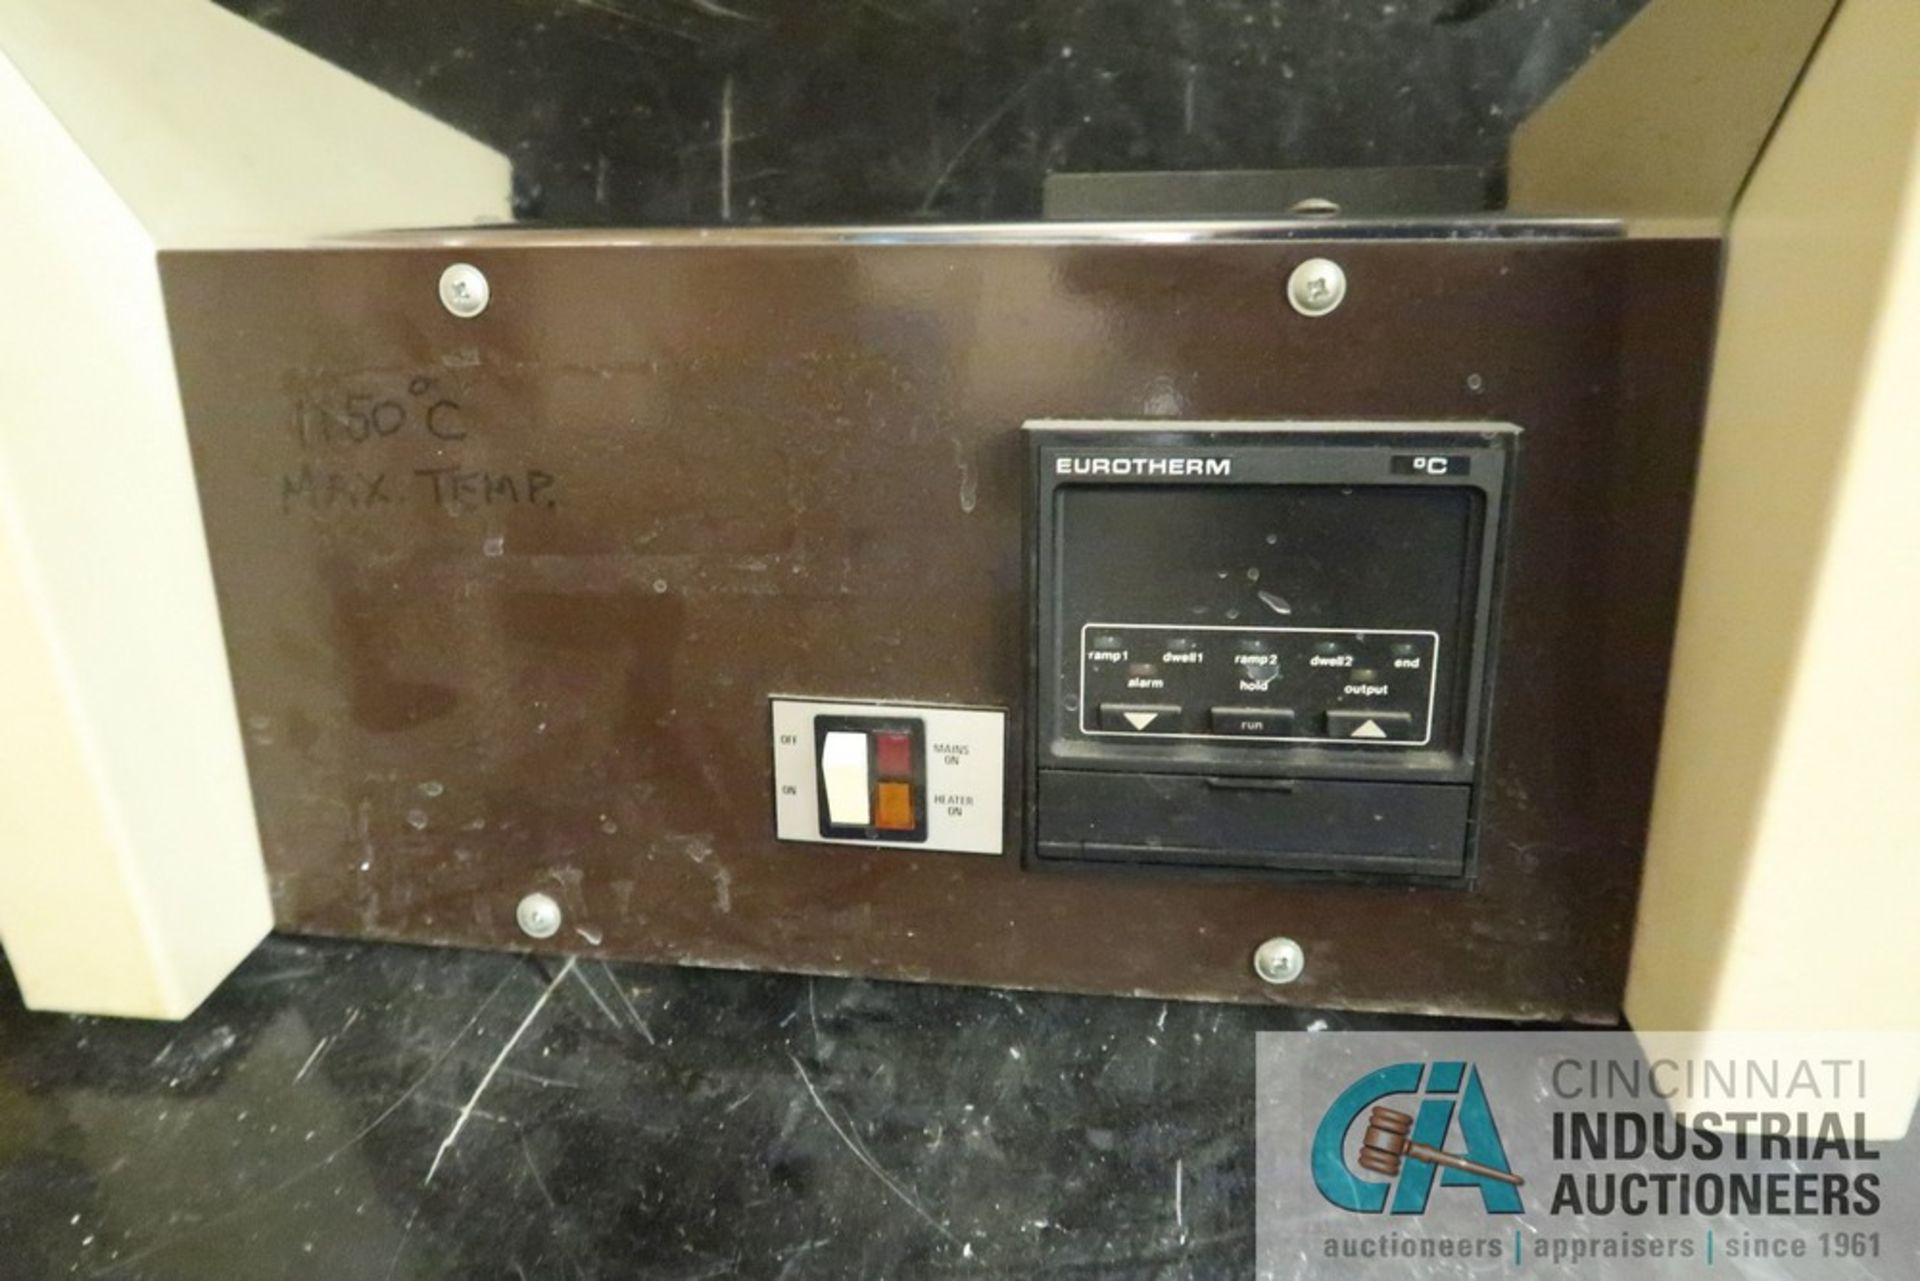 LAB-LINE MODEL 4230-3 OVEN, 5" X 4" X 8" CHAMBER (ROOM 4) - Located in the basement - Image 2 of 4